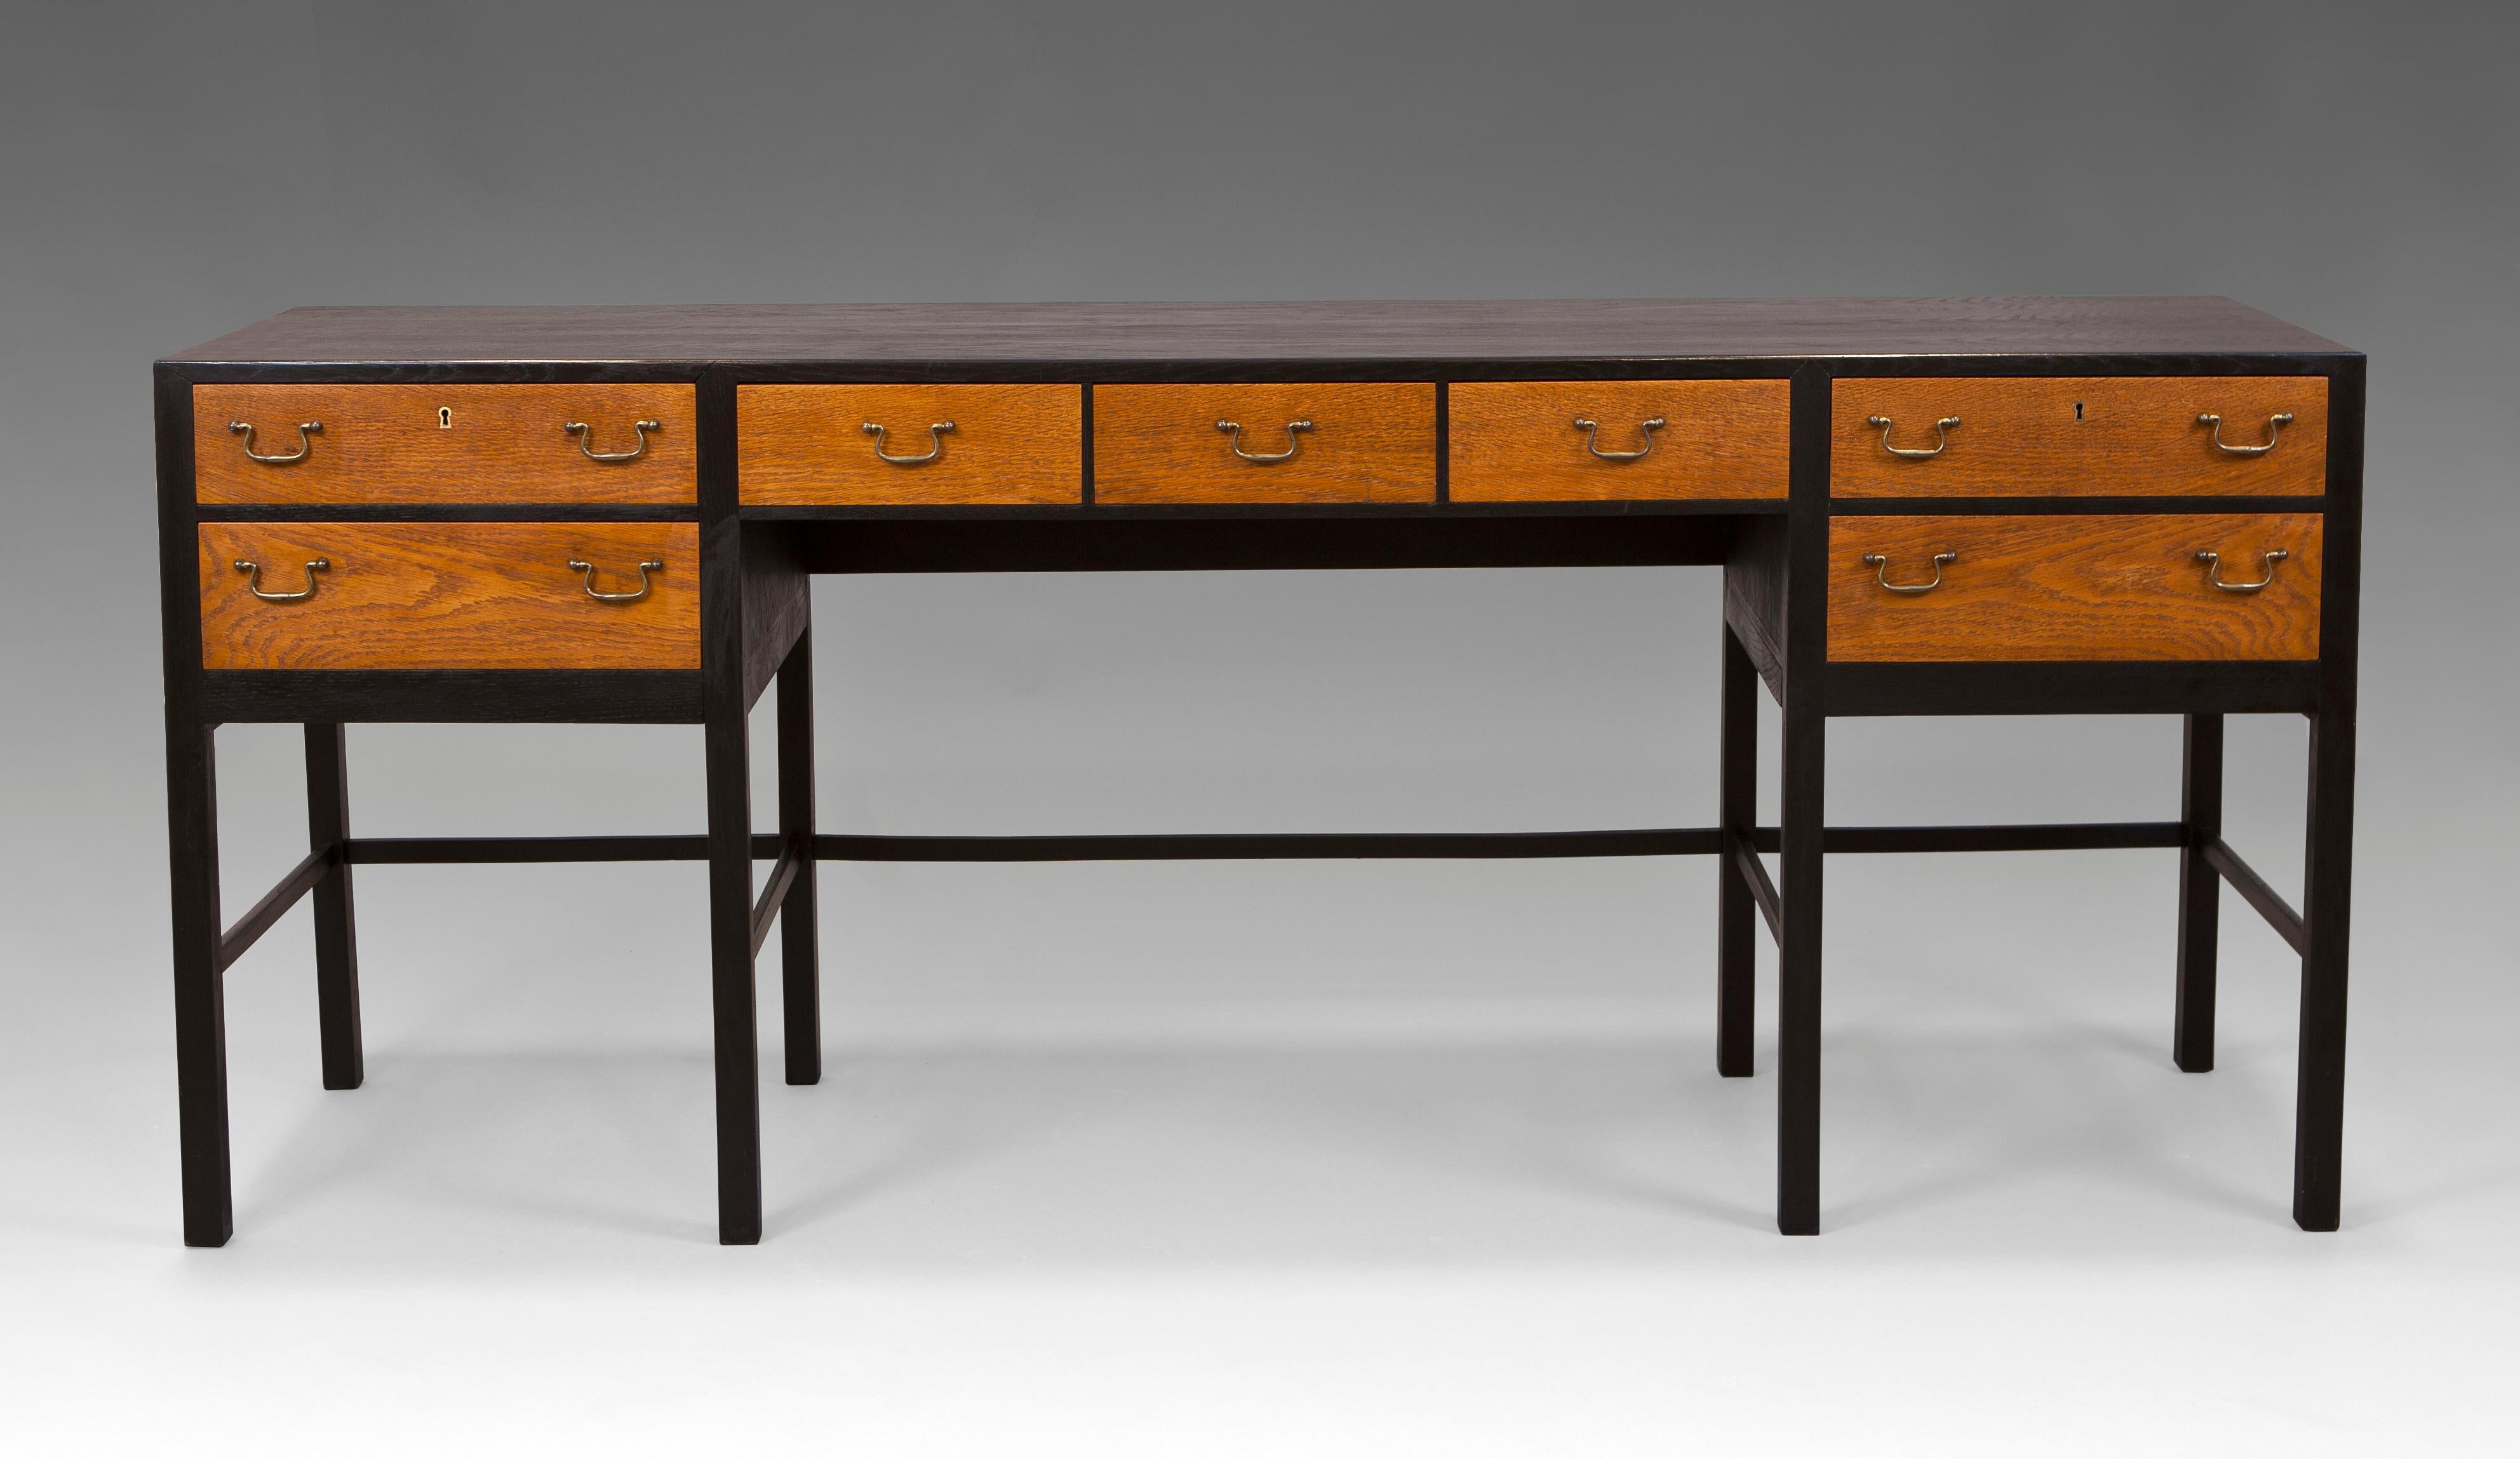 Sideboard in oak and black stained oak with brass handles. Lysberg & Therp. Denmark, 1950s.